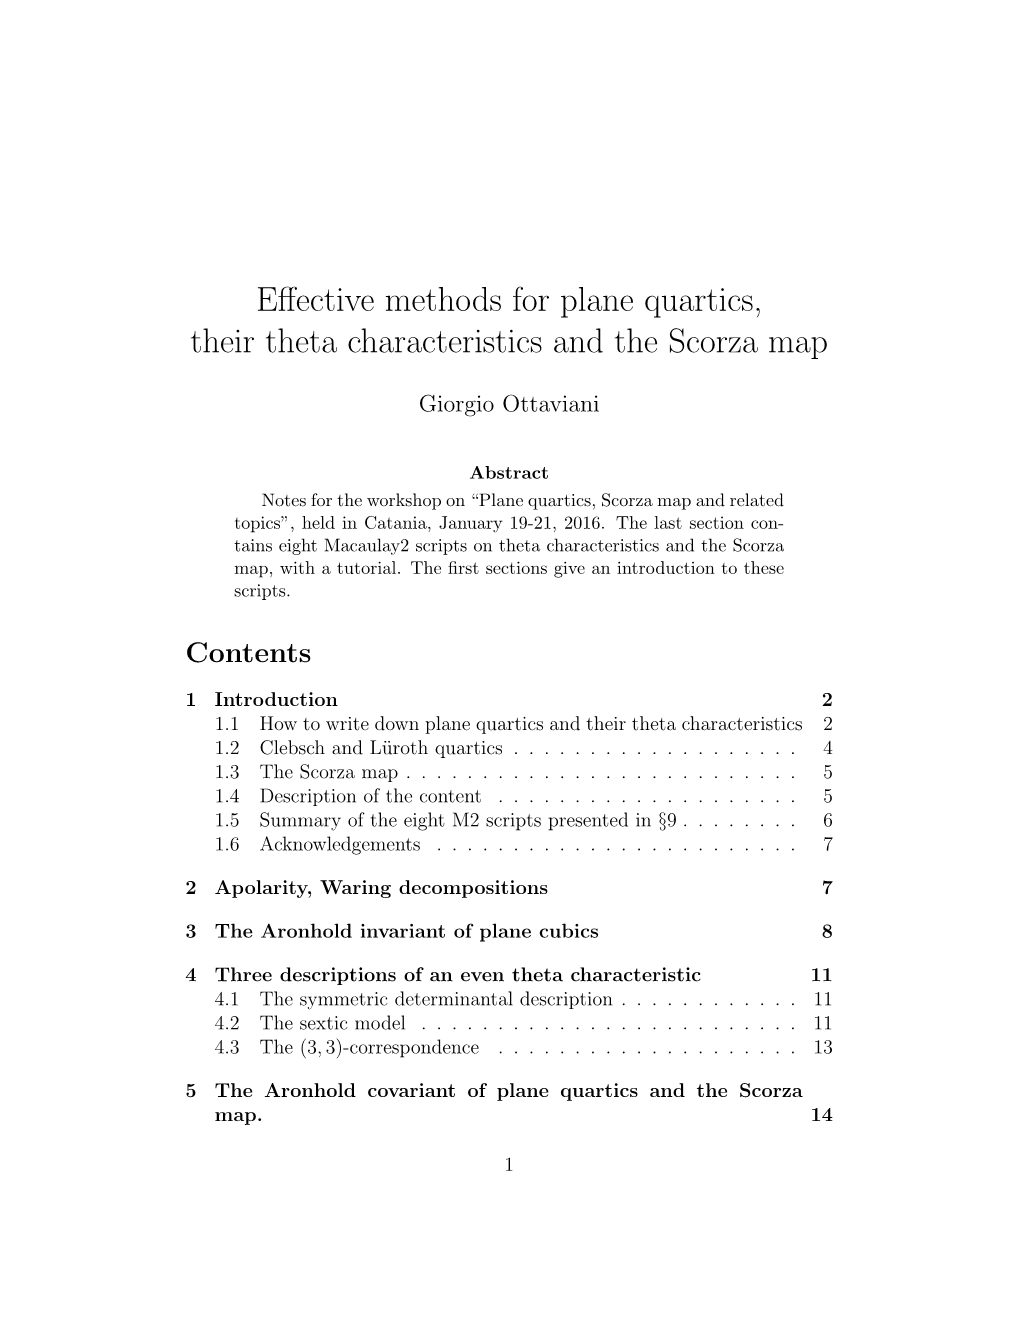 Effective Methods for Plane Quartics, Their Theta Characteristics and The